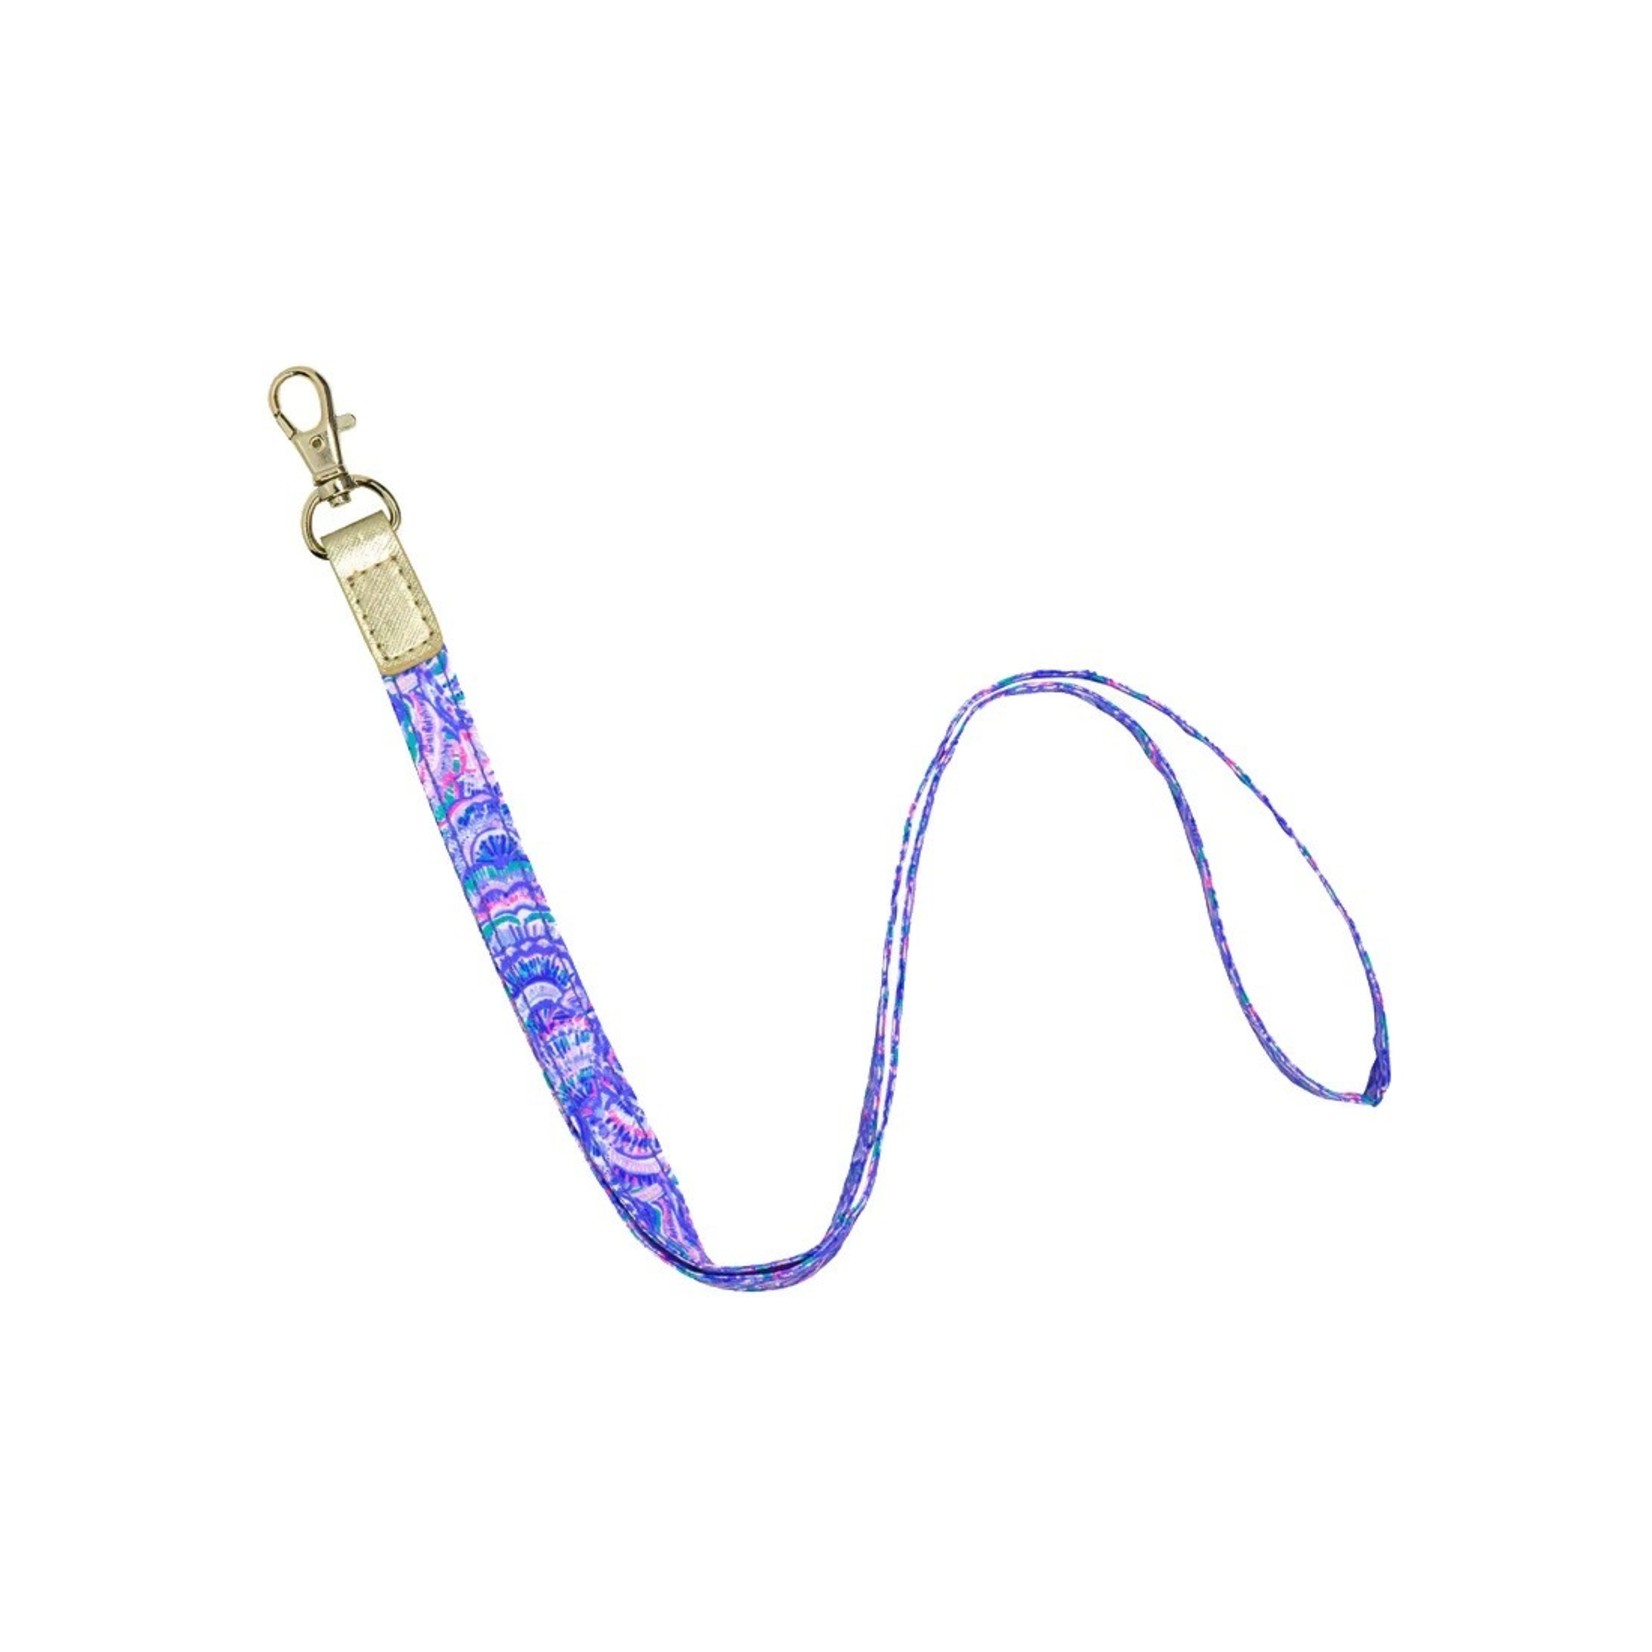 Lilly Pulitzer Happy as a Clam Lanyard